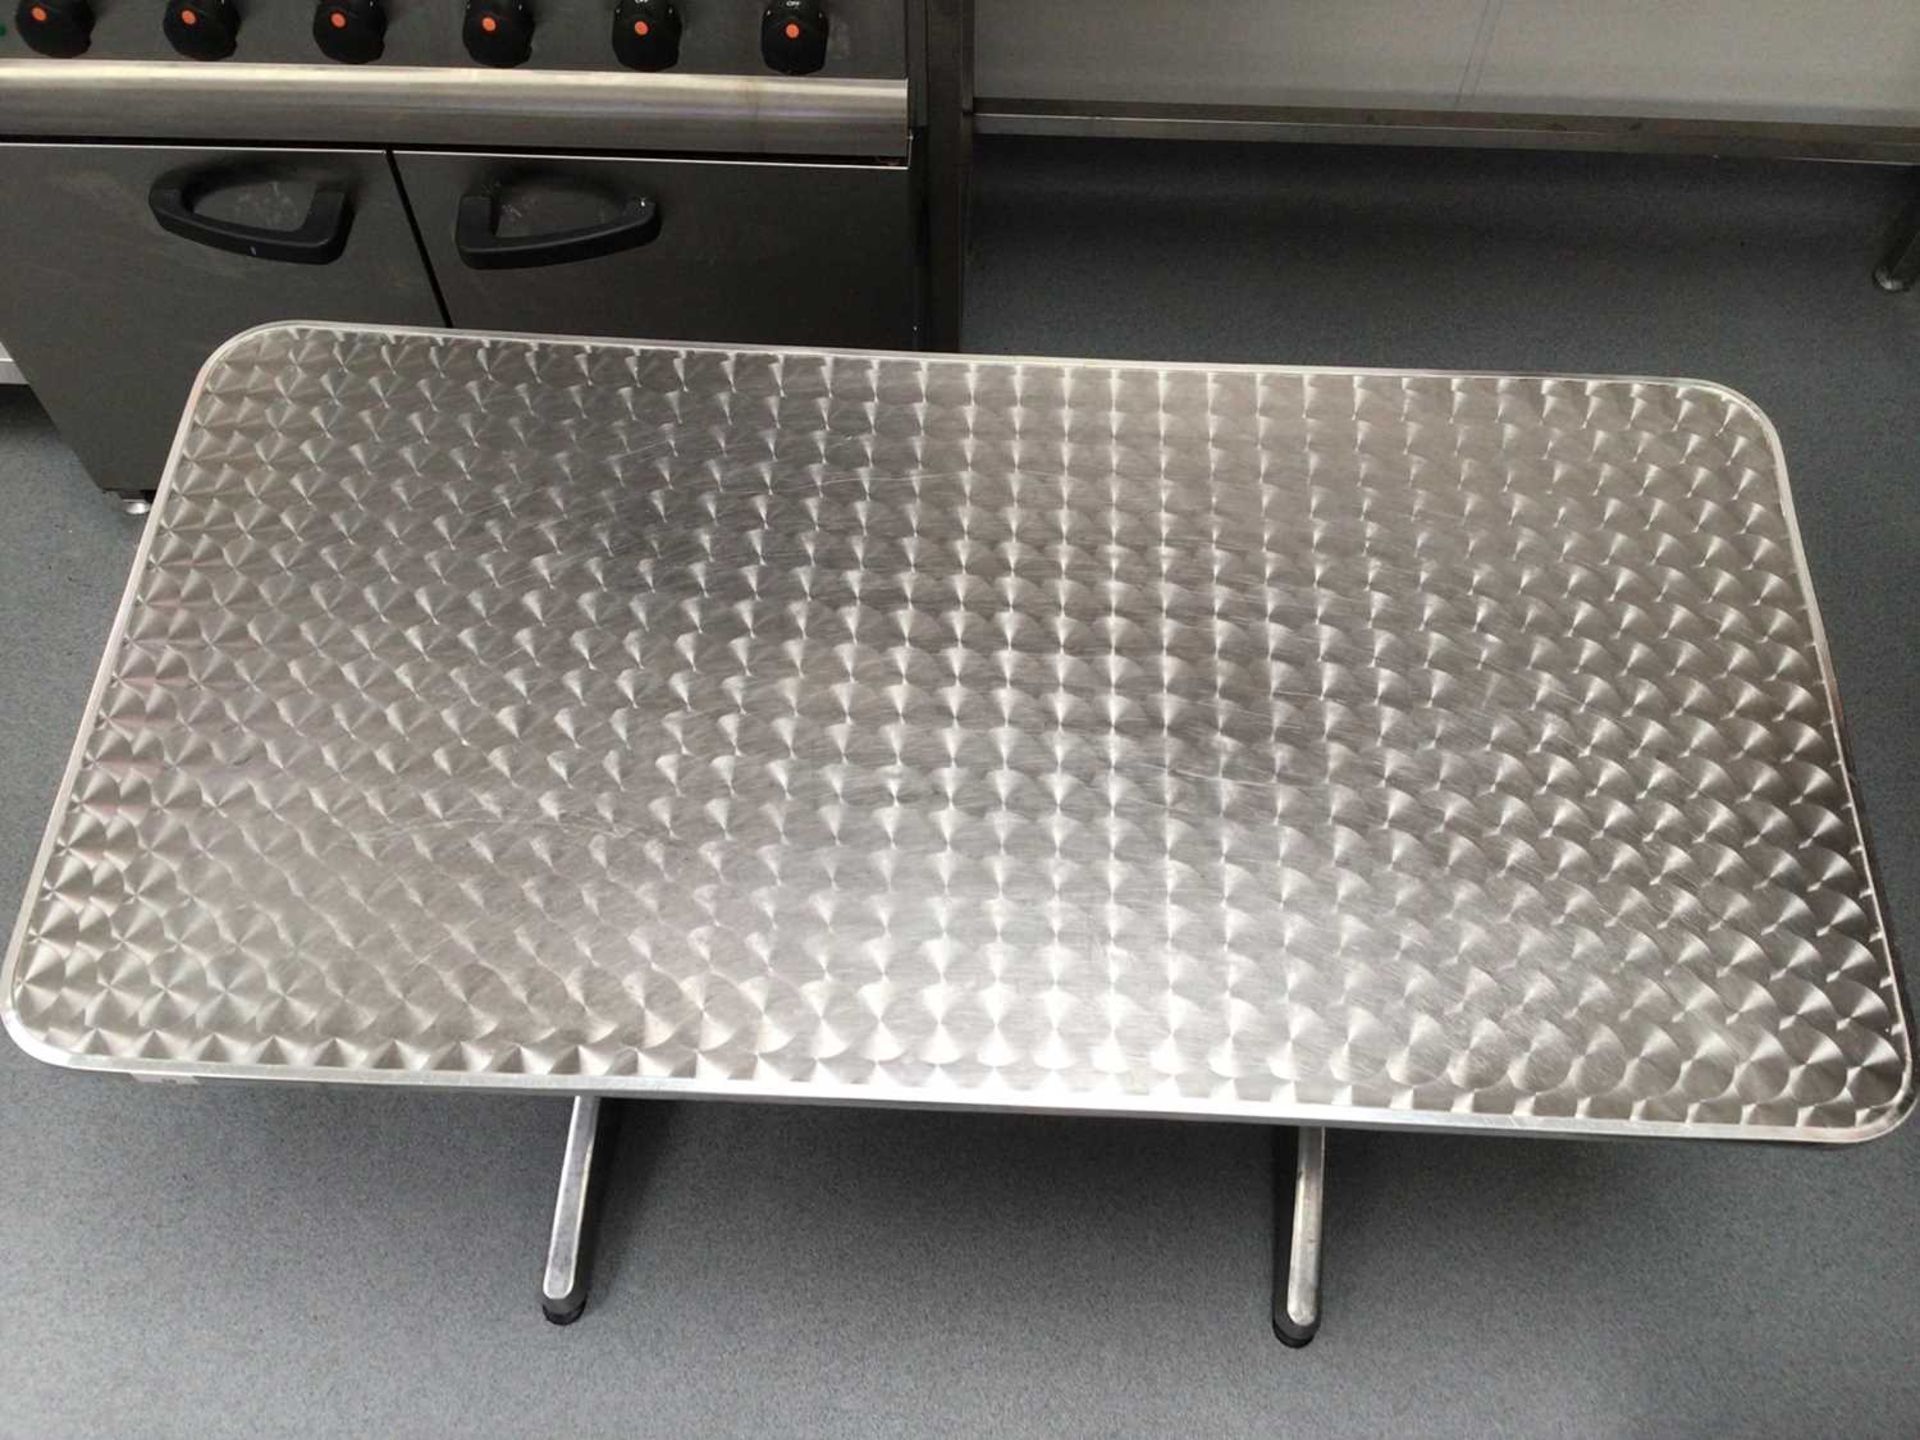 A brushed stainless steel rectangular top table, with plated column pedestals, 1200 mm x 600 mm - Image 2 of 2